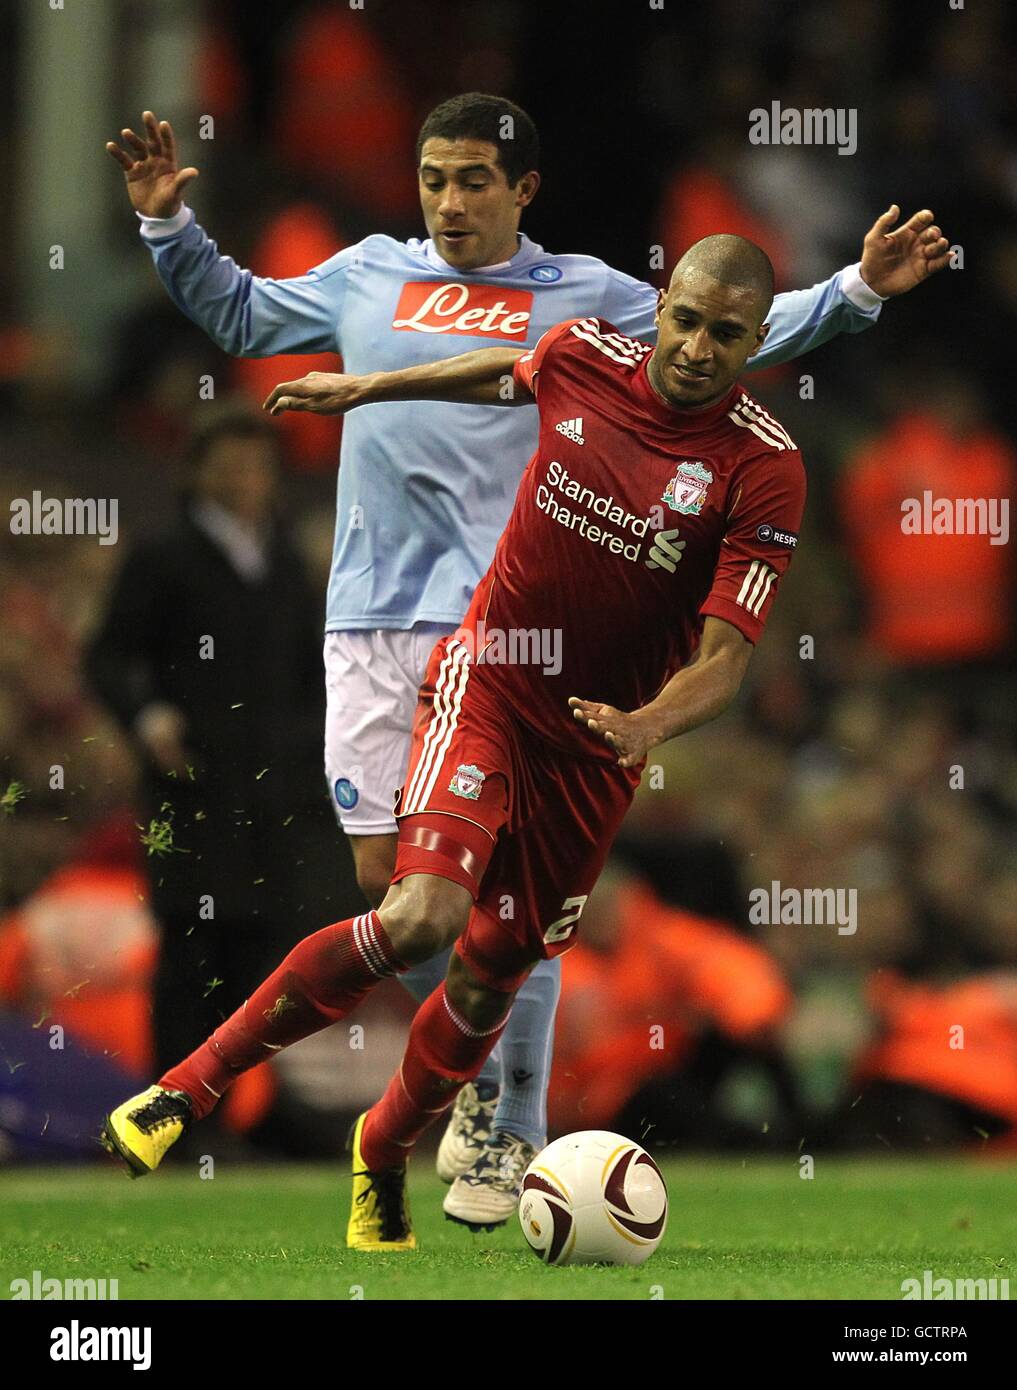 Soccer - UEFA Europa League - Group K - Liverpool v Napoli - Anfield. Liverpool's David Ngog (right) and Napoli's Walter Gargano battle for the ball Stock Photo